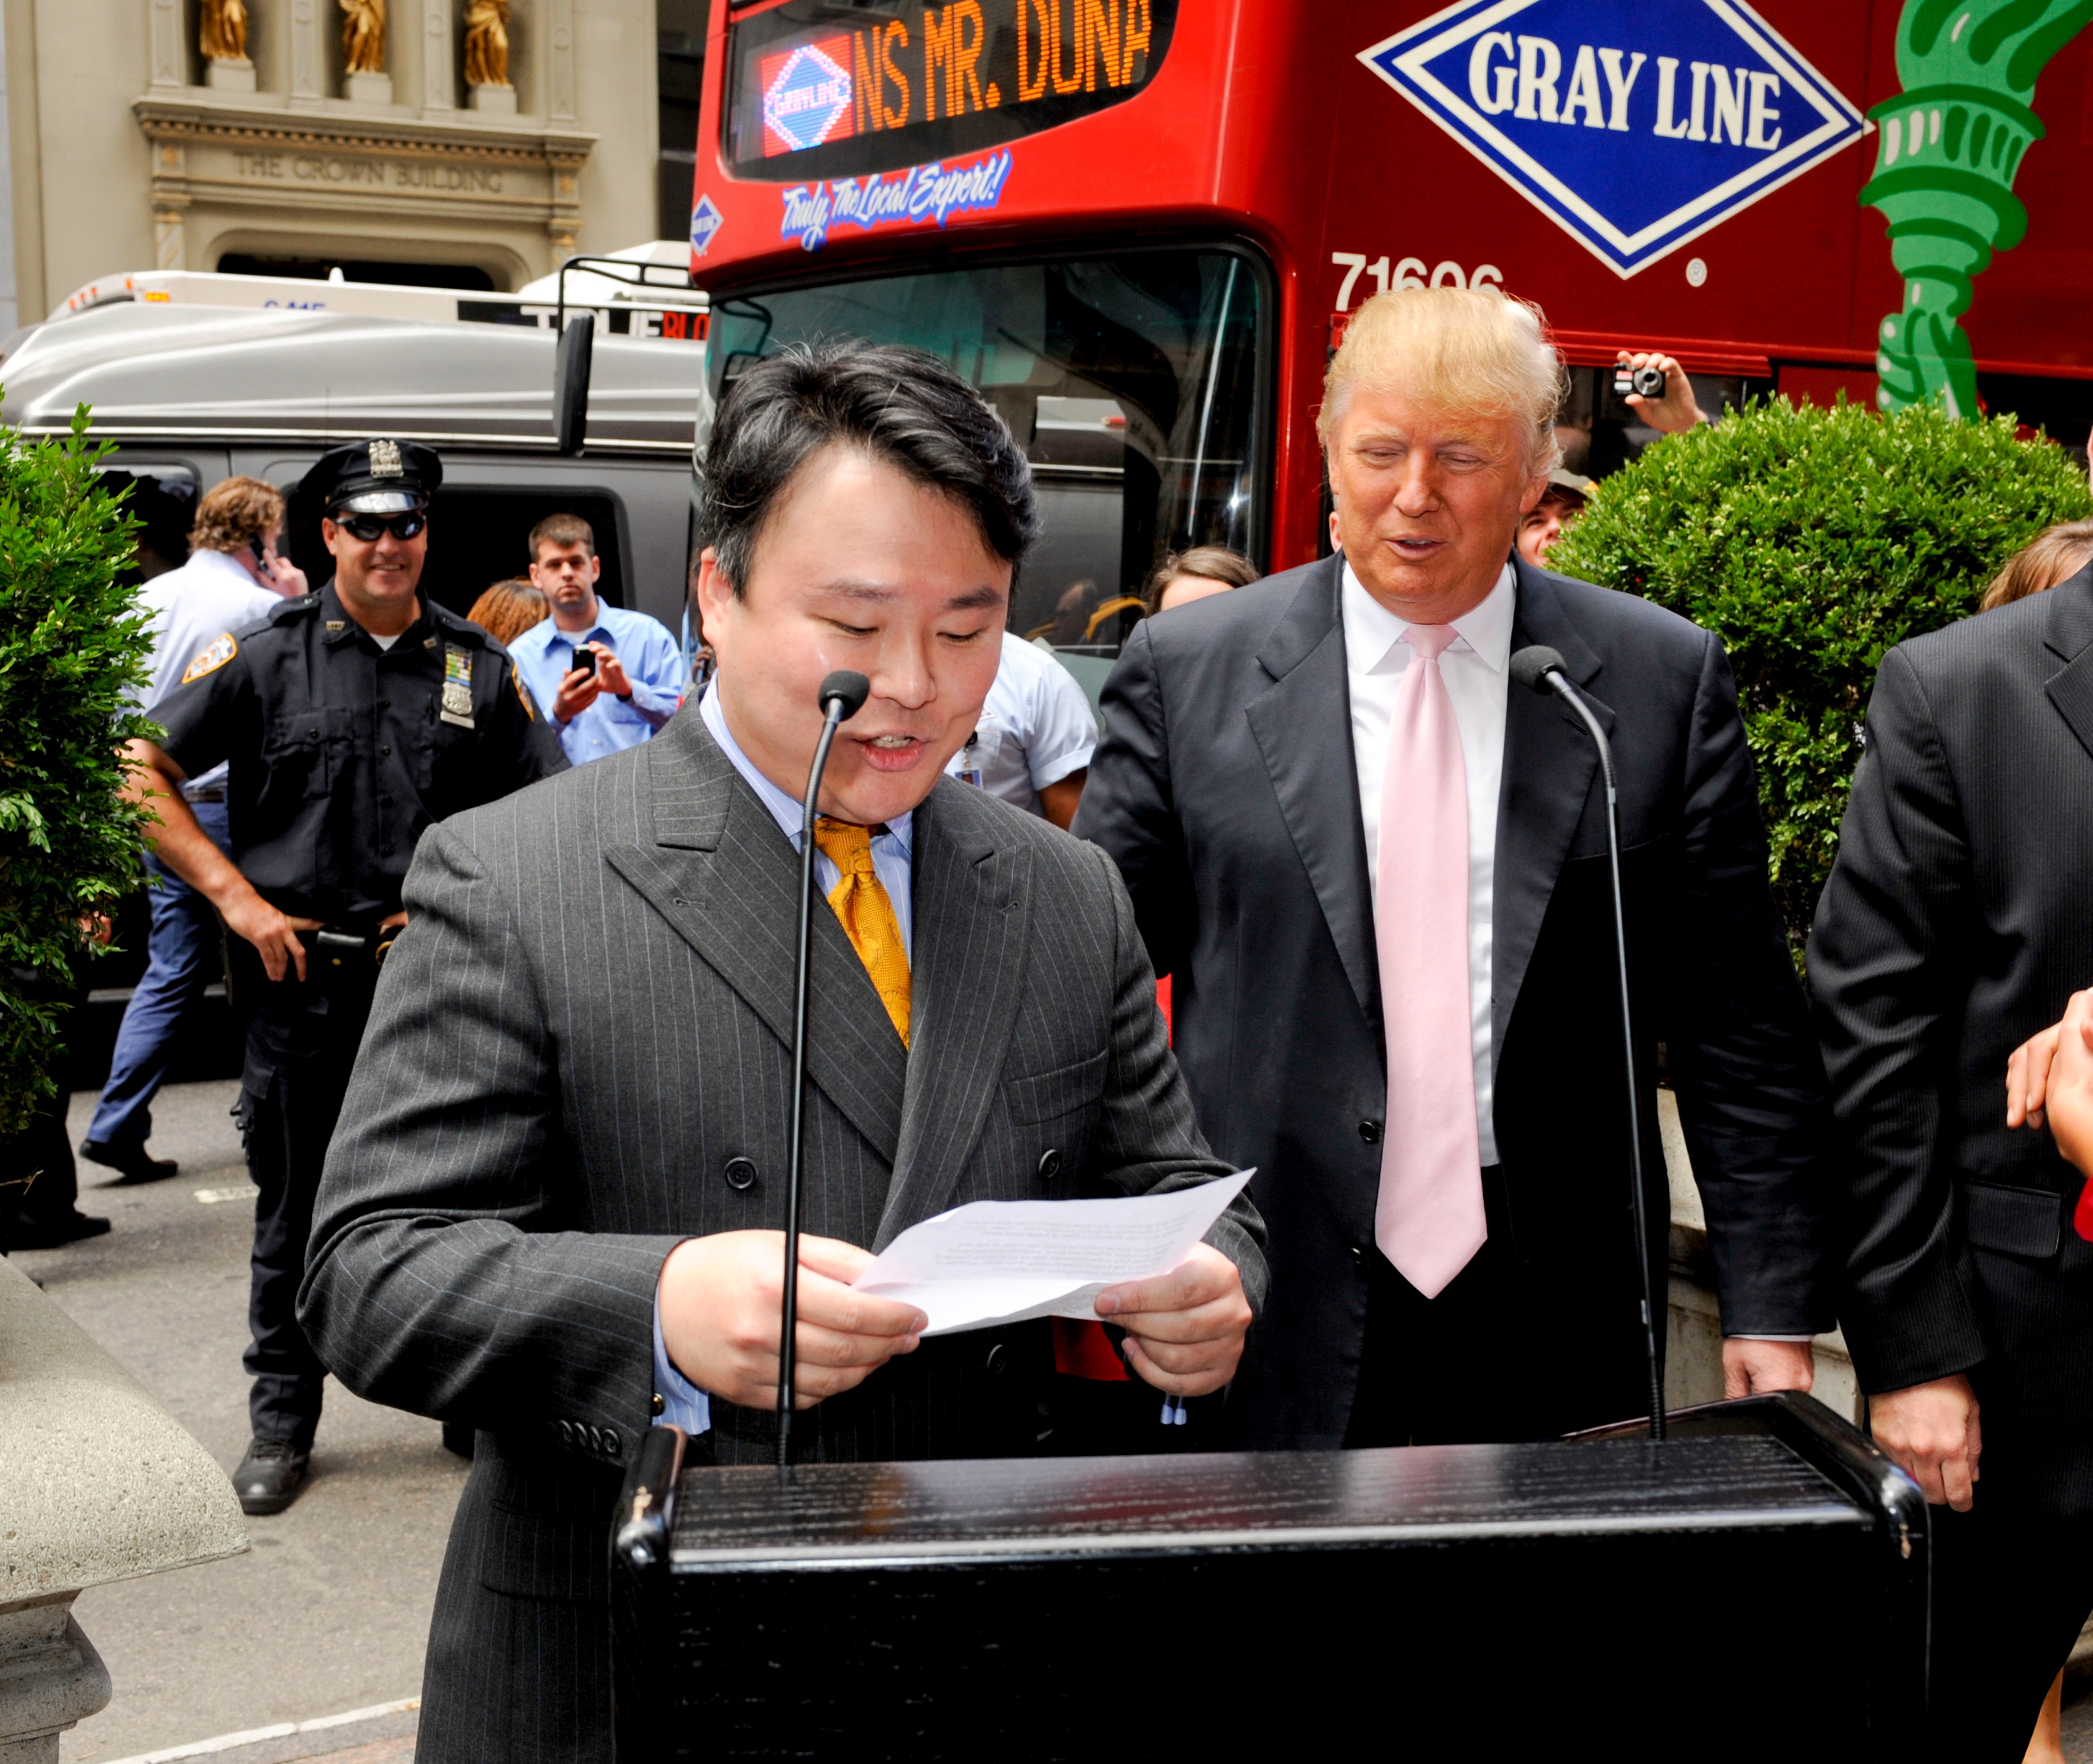 David W. Chien introduces Ride of Fame Honoree Donald J. Trump (June 8th, 2010).